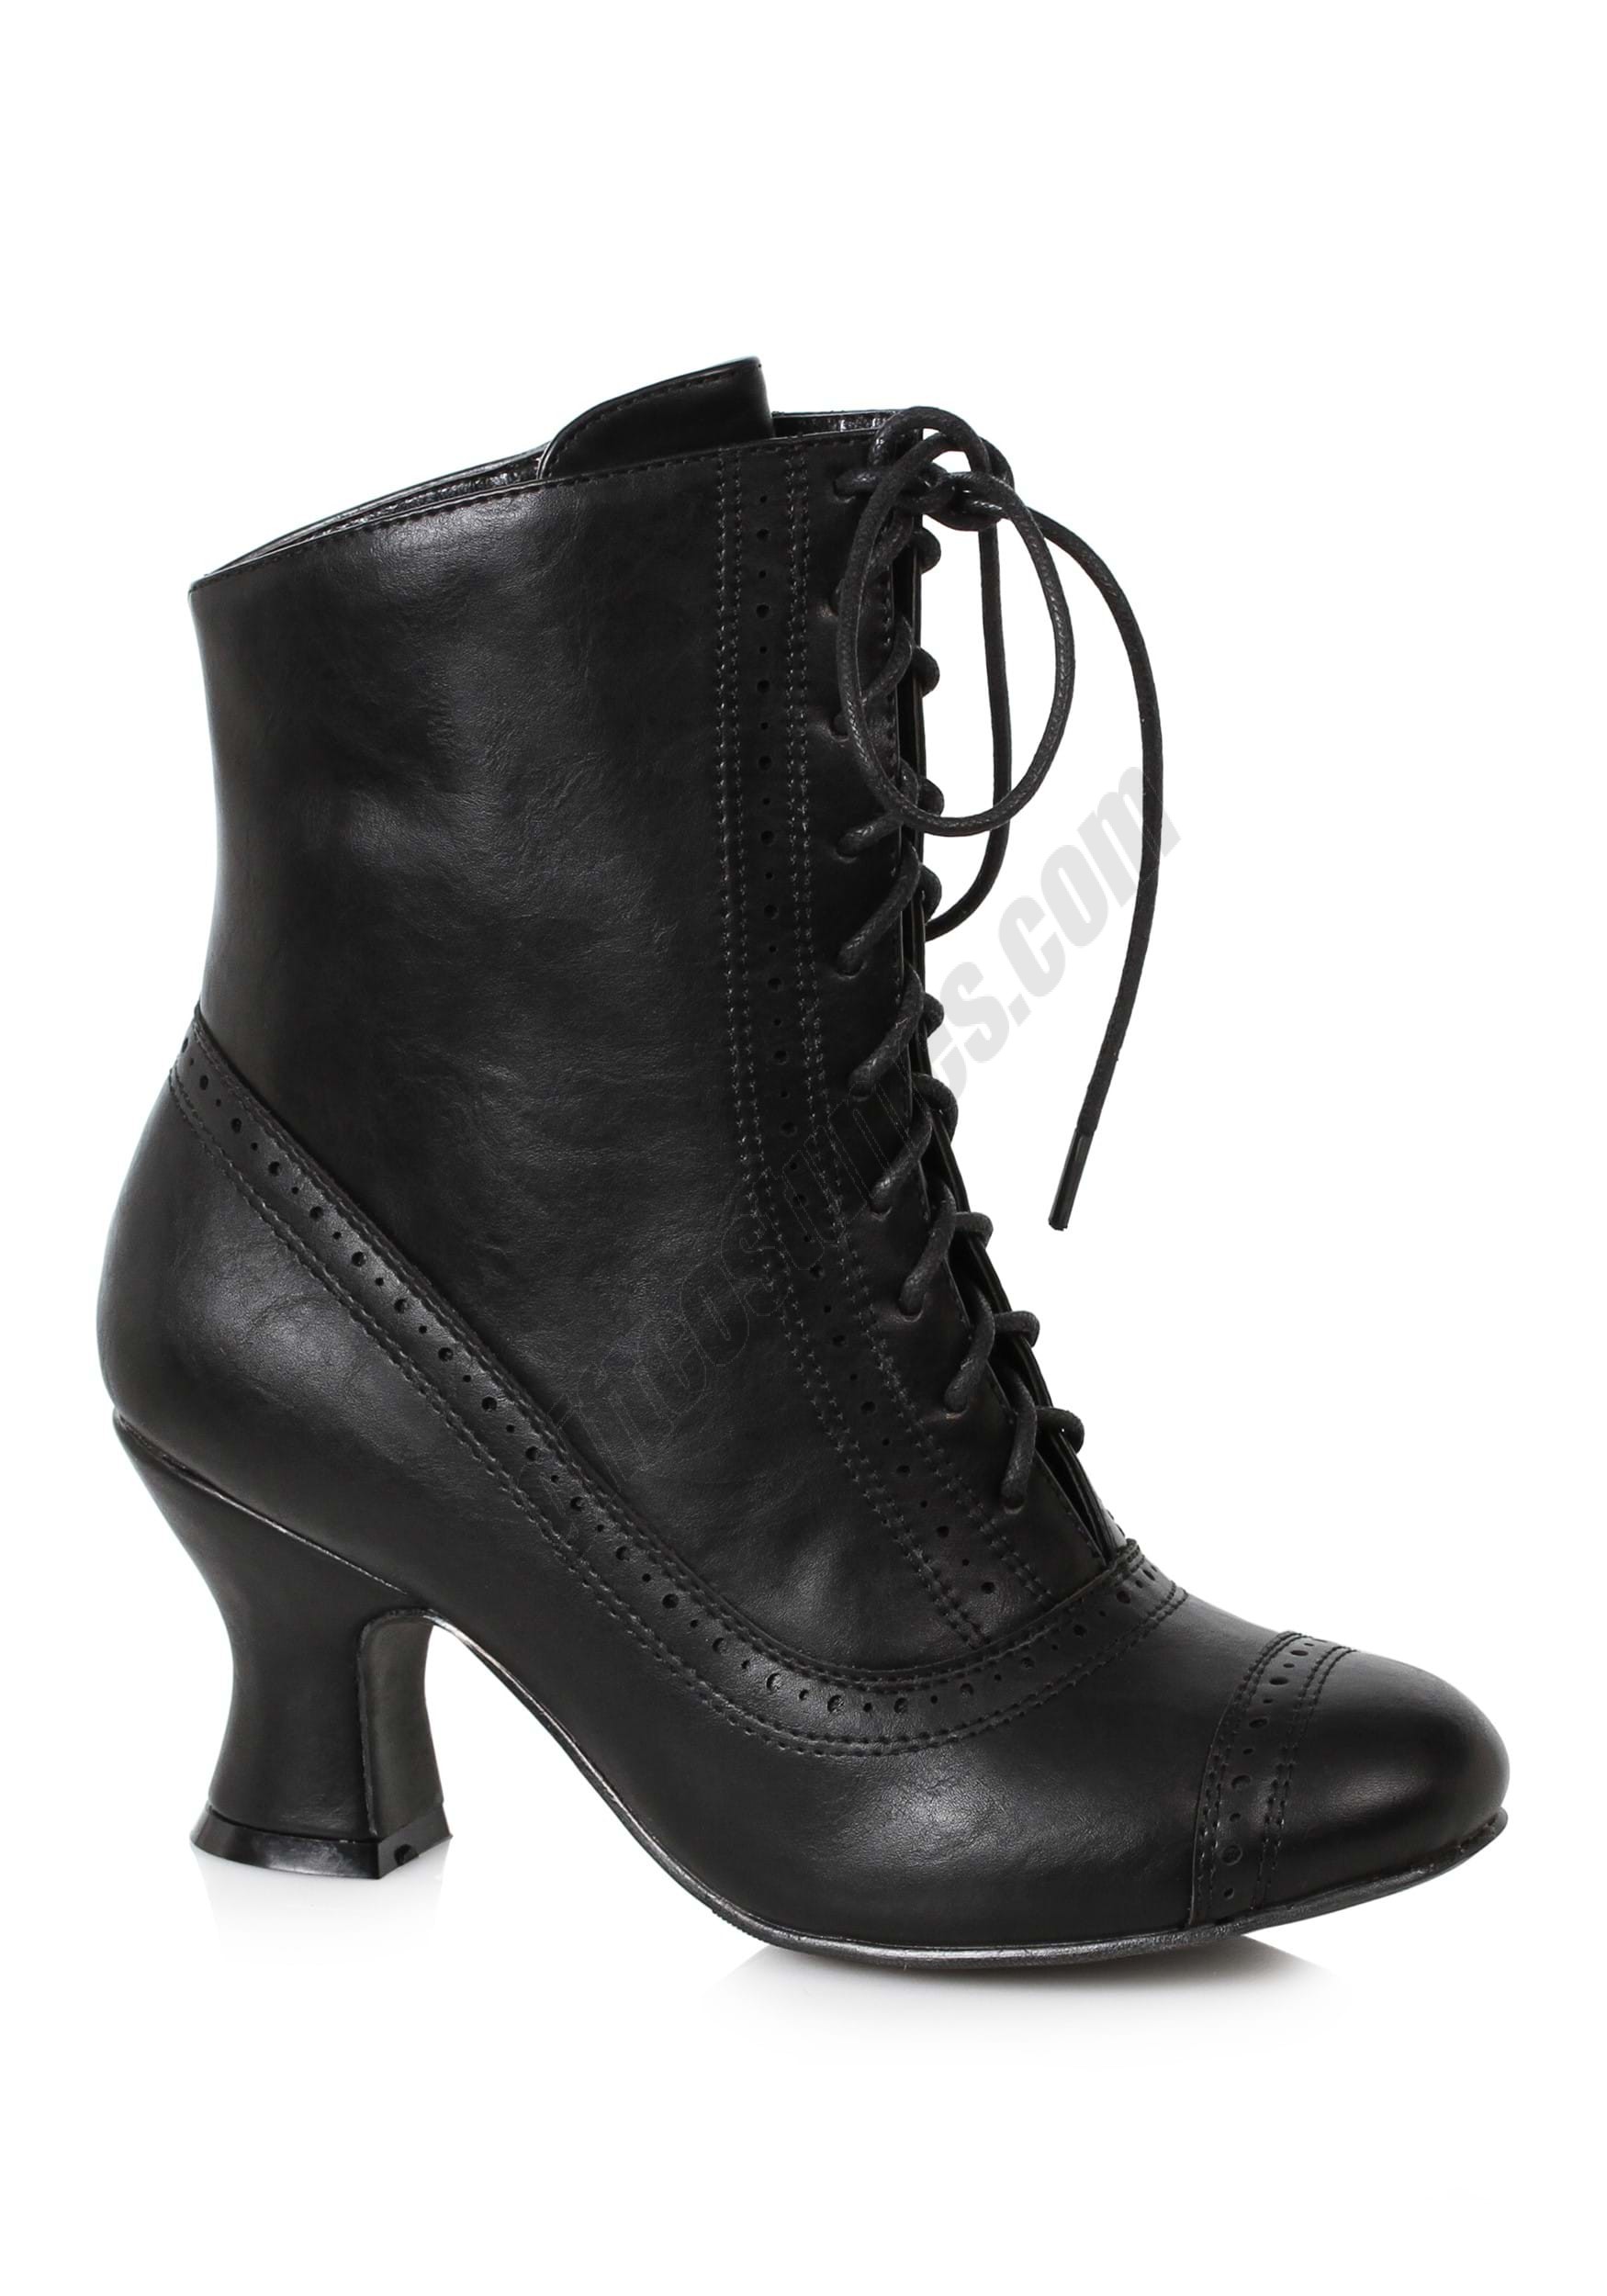 Black Victorian Boots for Women Promotions - Black Victorian Boots for Women Promotions